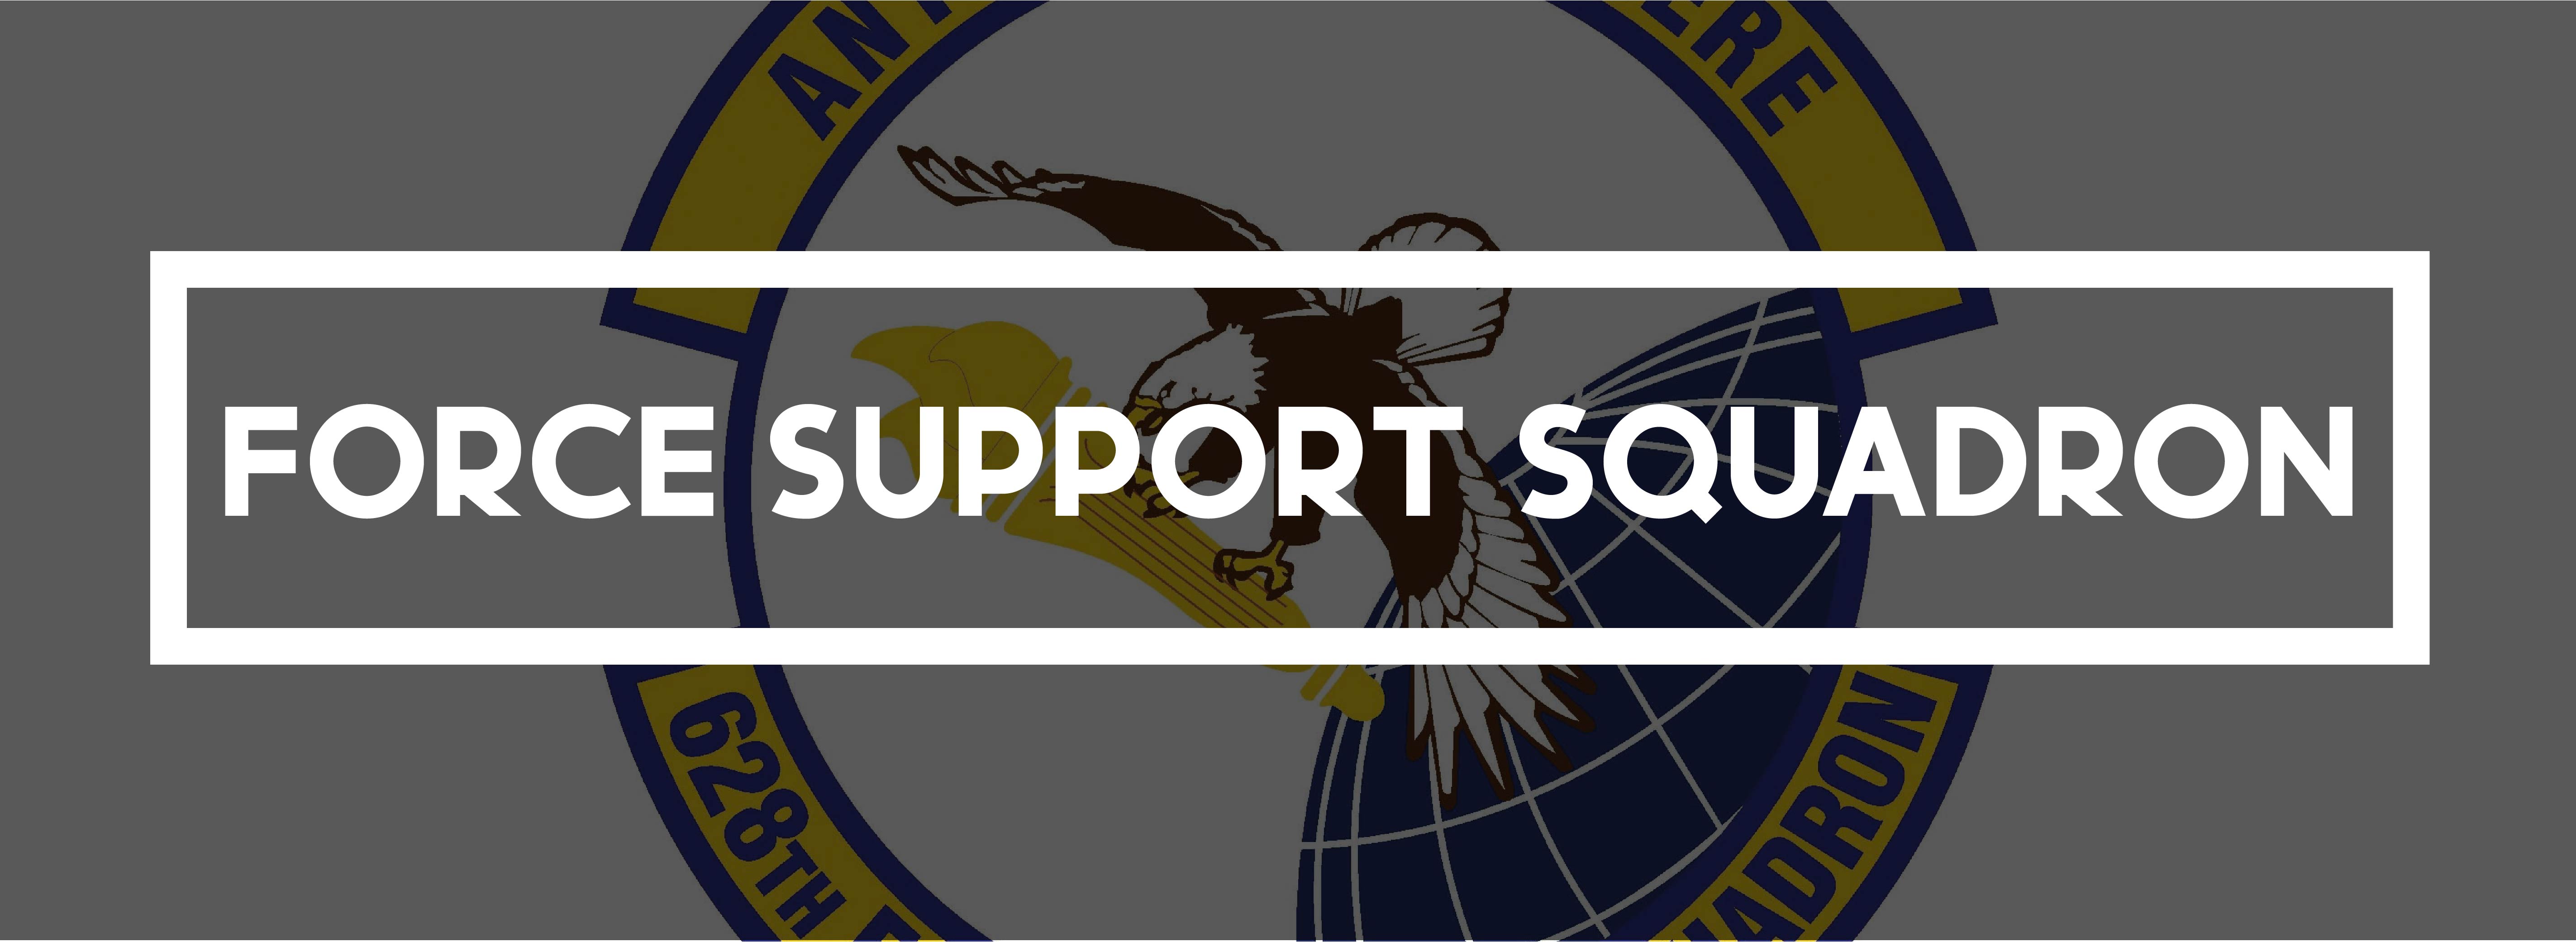 A logo for the 628th Force Support Squadron